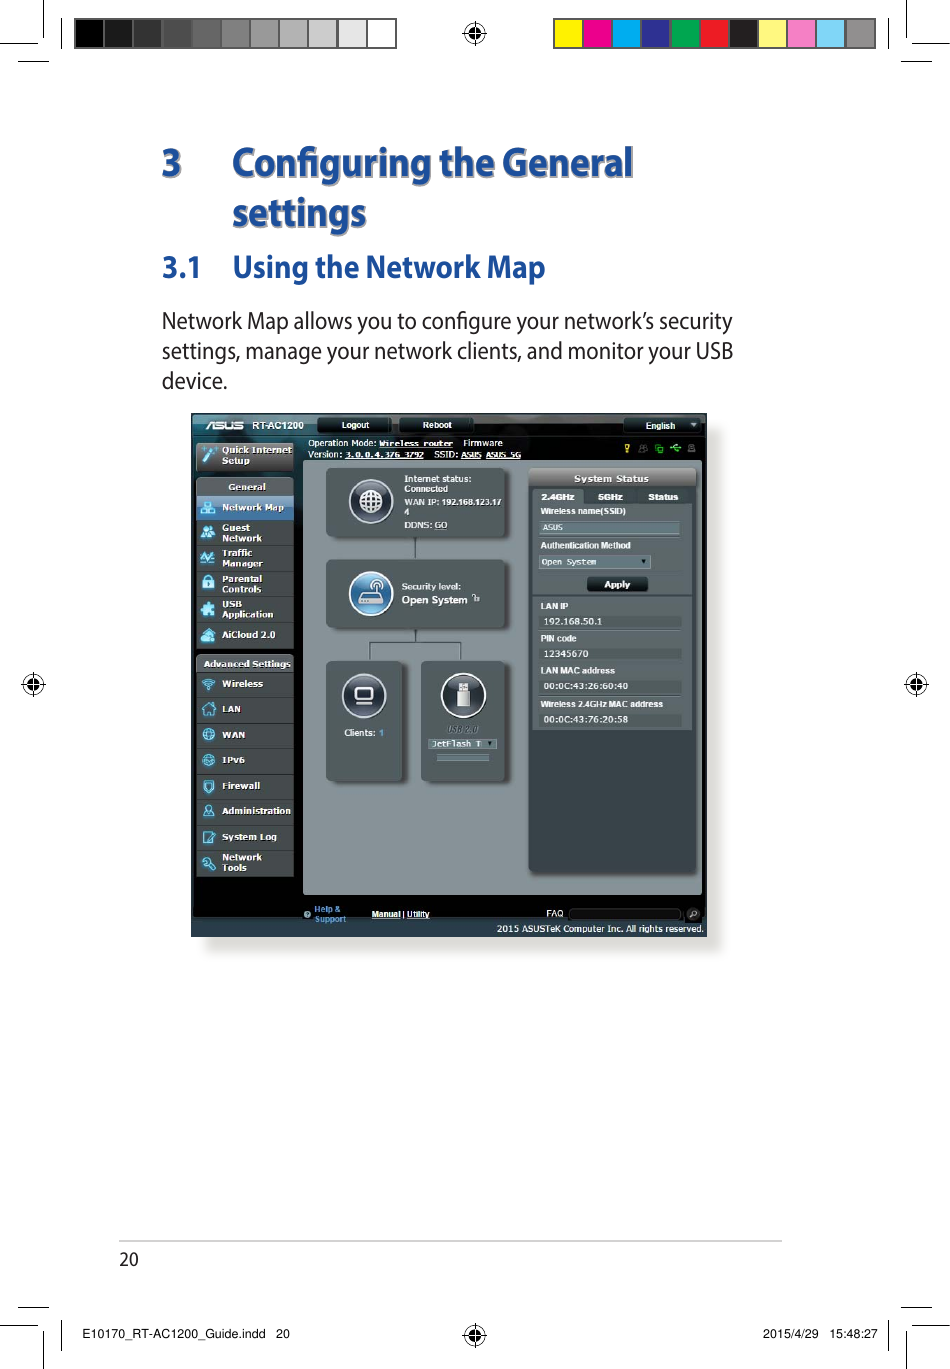 203  Conguring the General settings3.1  Using the Network Map Network Map allows you to congure your network’s security settings, manage your network clients, and monitor your USB device.E10170_RT-AC1200_Guide.indd   20 2015/4/29   15:48:27